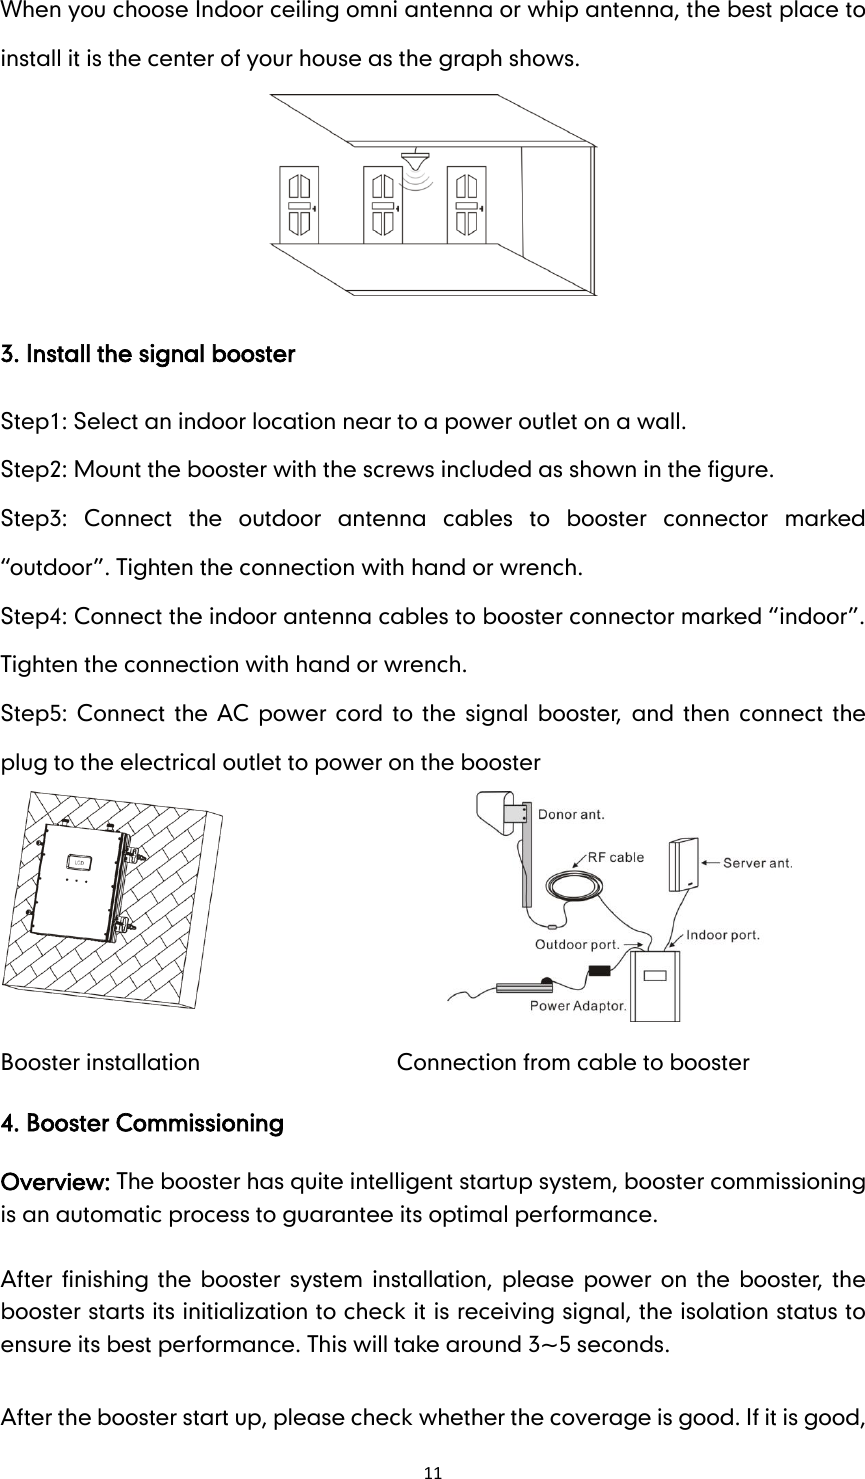 11 When you choose Indoor ceiling omni antenna or whip antenna, the best place to install it is the center of your house as the graph shows.  3. Install the signal booster Step1: Select an indoor location near to a power outlet on a wall. Step2: Mount the booster with the screws included as shown in the figure. Step3:  Connect  the  outdoor  antenna  cables  to  booster  connector  marked “outdoor”. Tighten the connection with hand or wrench.   Step4: Connect the indoor antenna cables to booster connector marked “indoor”. Tighten the connection with hand or wrench. Step5: Connect  the AC power  cord  to  the  signal  booster,  and  then  connect  the plug to the electrical outlet to power on the booster         Booster installation                                    Connection from cable to booster 4. Booster Commissioning Overview: The booster has quite intelligent startup system, booster commissioning is an automatic process to guarantee its optimal performance.      After  finishing the  booster system installation, please  power  on the  booster, the booster starts its initialization to check it is receiving signal, the isolation status to ensure its best performance. This will take around 3~5 seconds.      After the booster start up, please check whether the coverage is good. If it is good, 